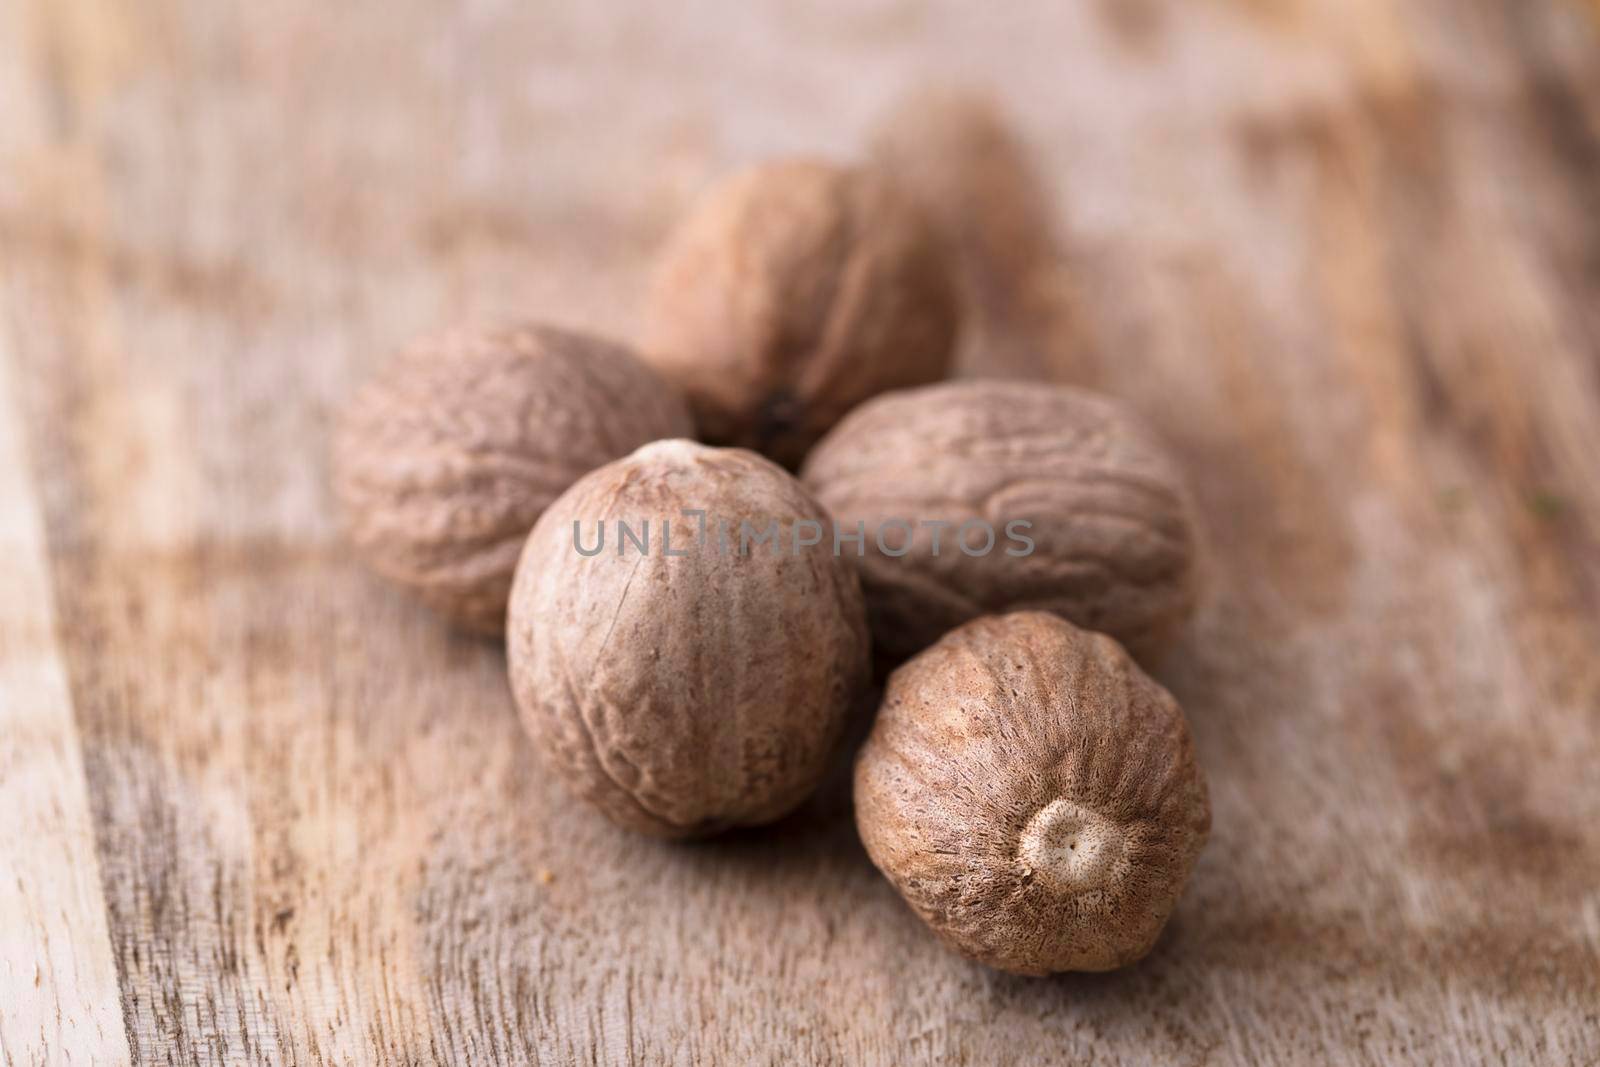 Whole nutmeg on rustic wooden surface